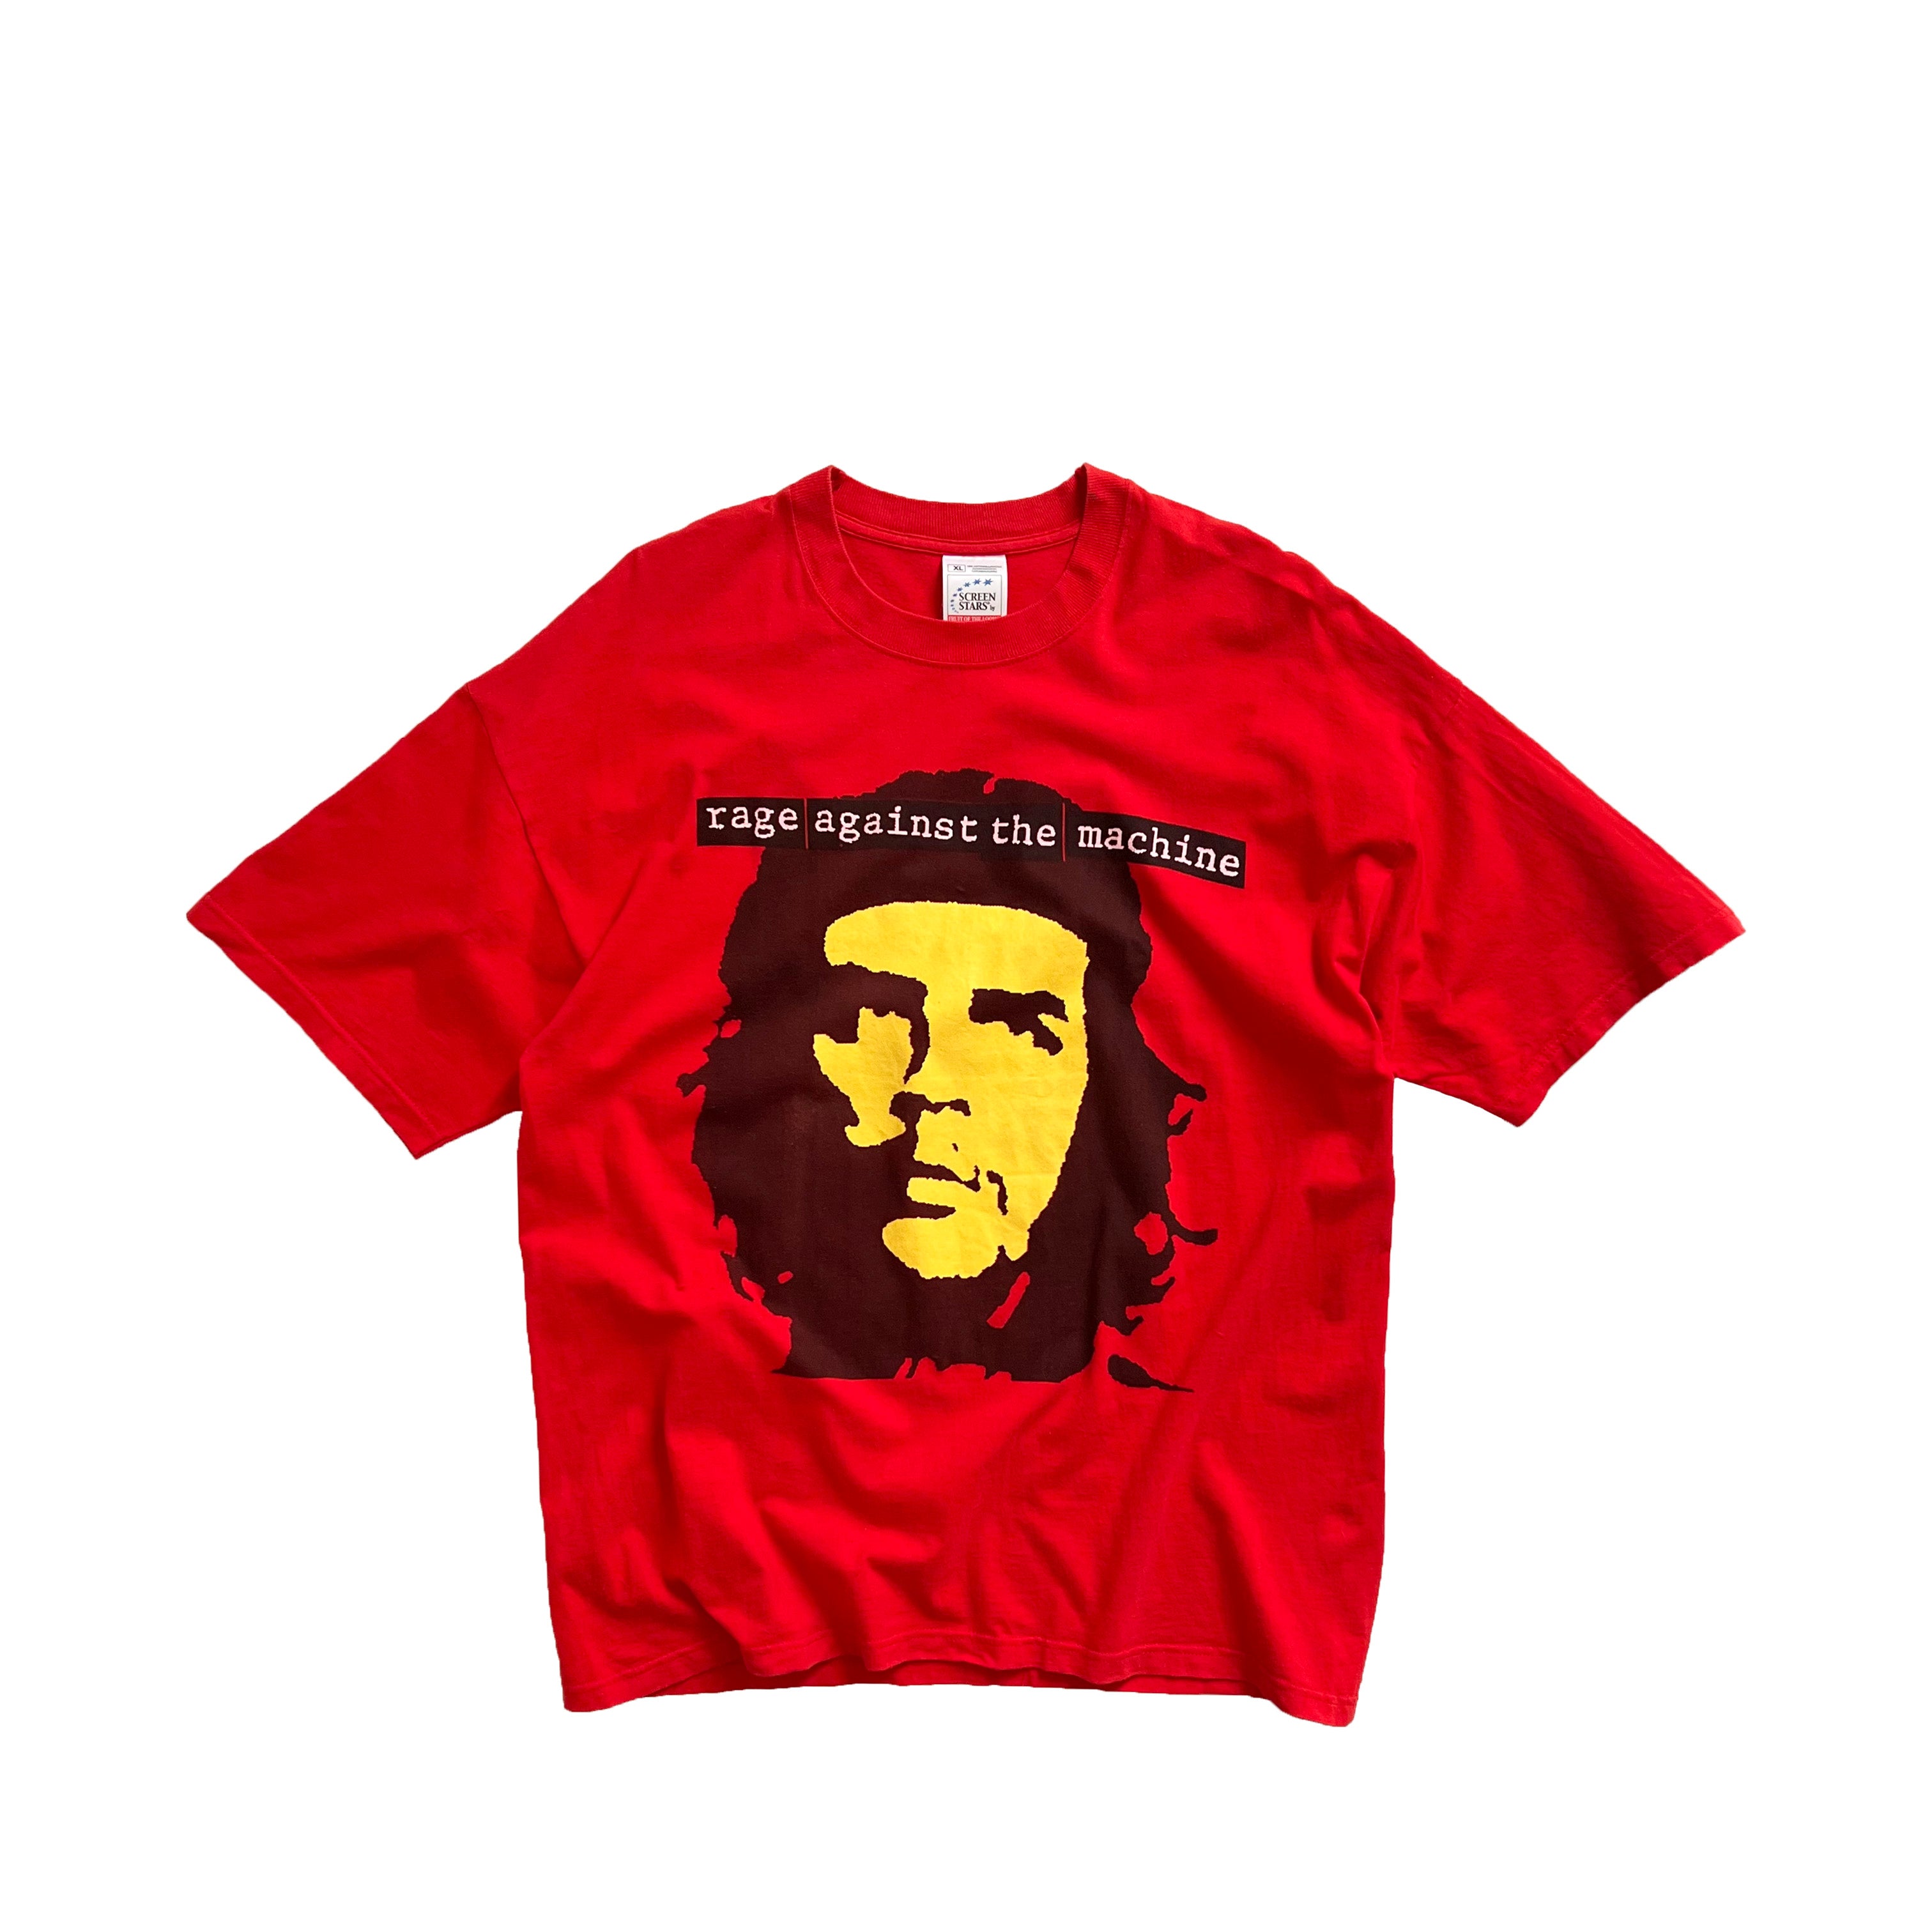 Rage against the machine ヴィンテージ tシャツレイジ - Tシャツ ...